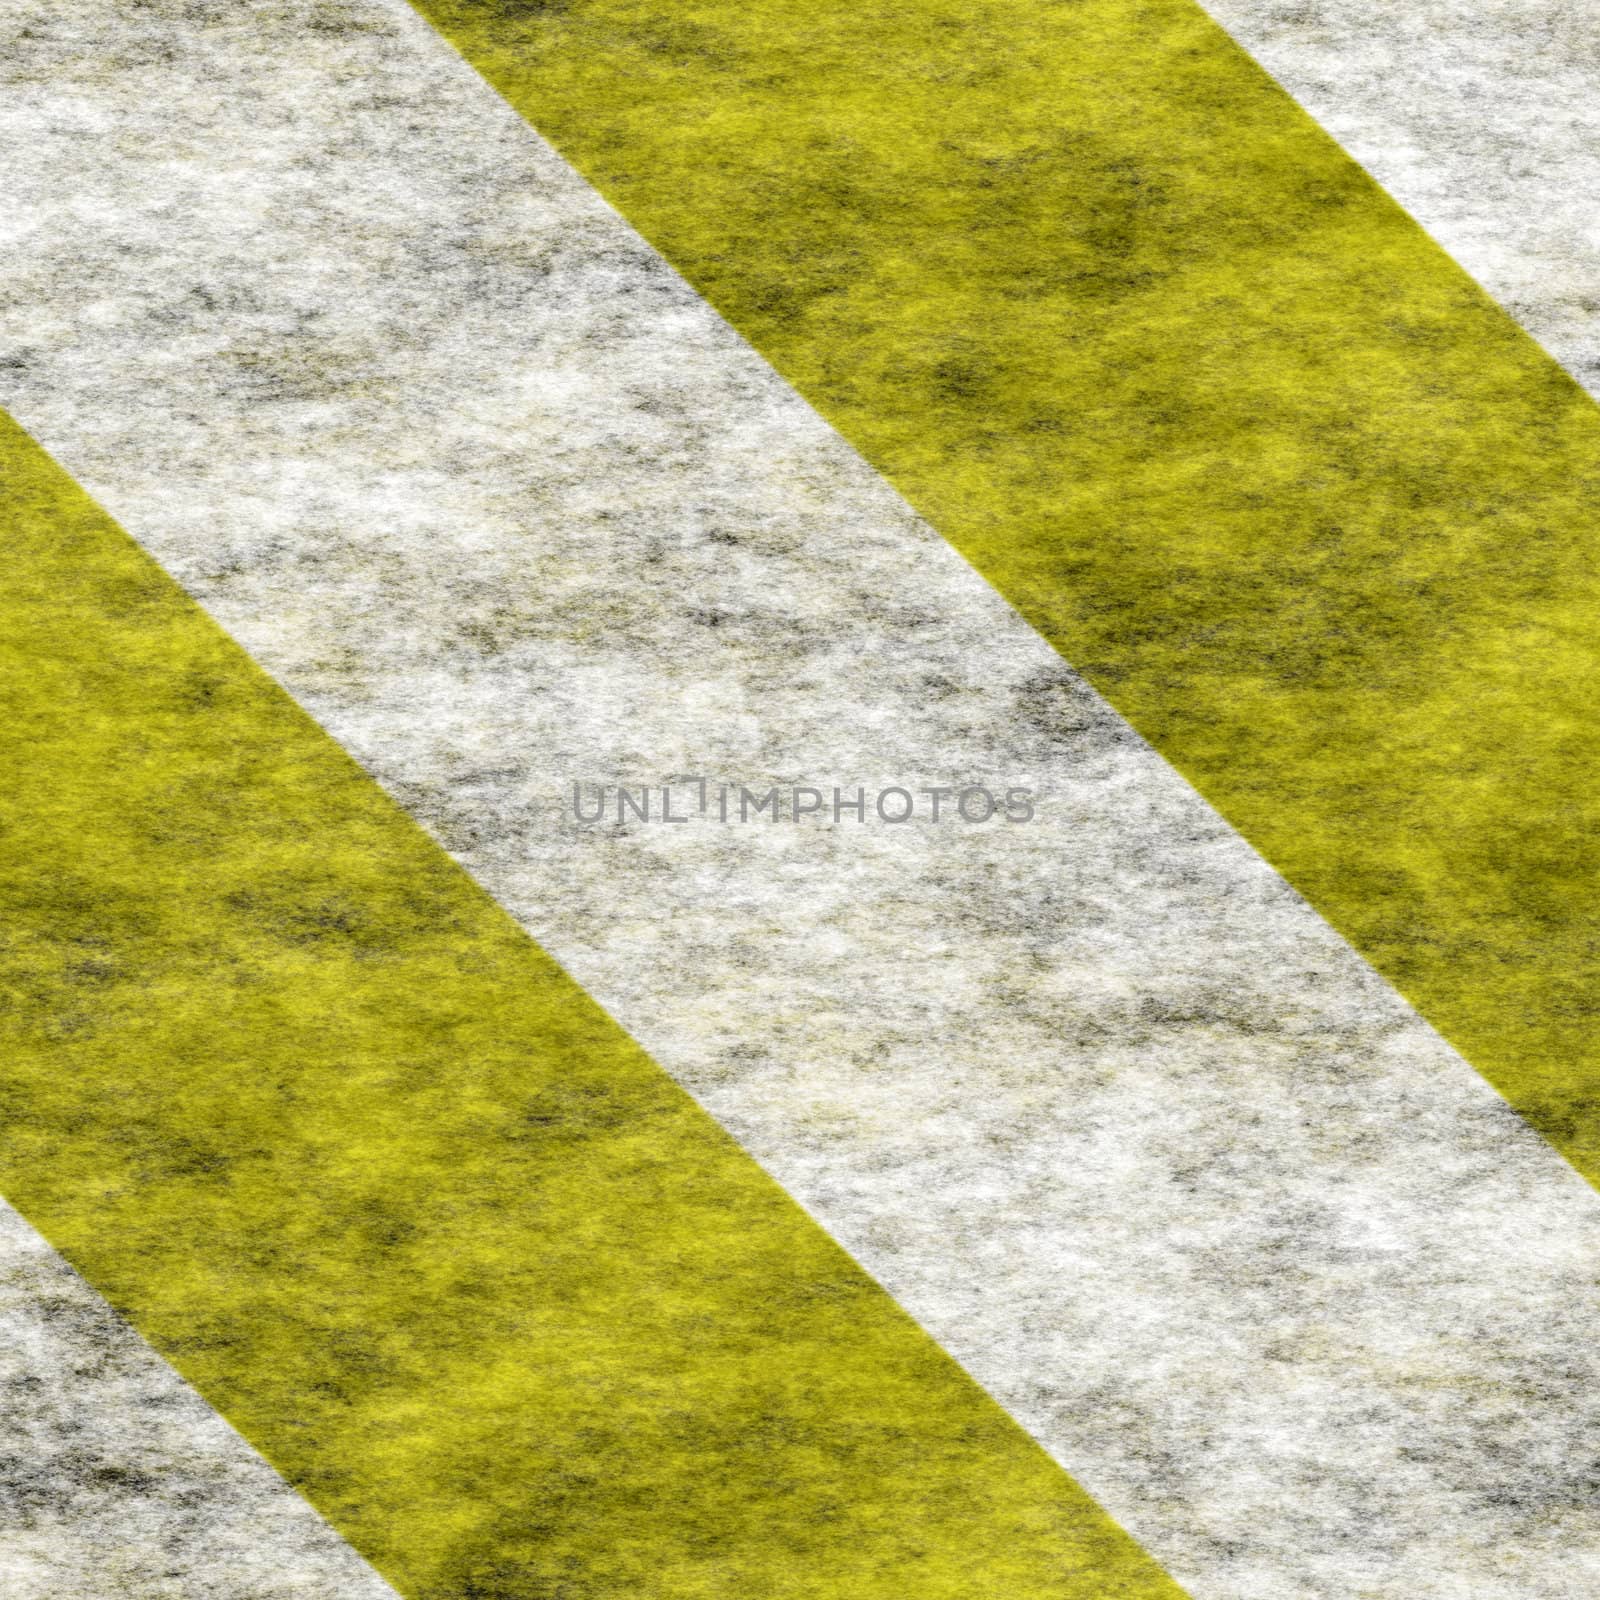 bold diagonal white and yellow warning / hazard stripes background, will tile seamlessly as a pattern